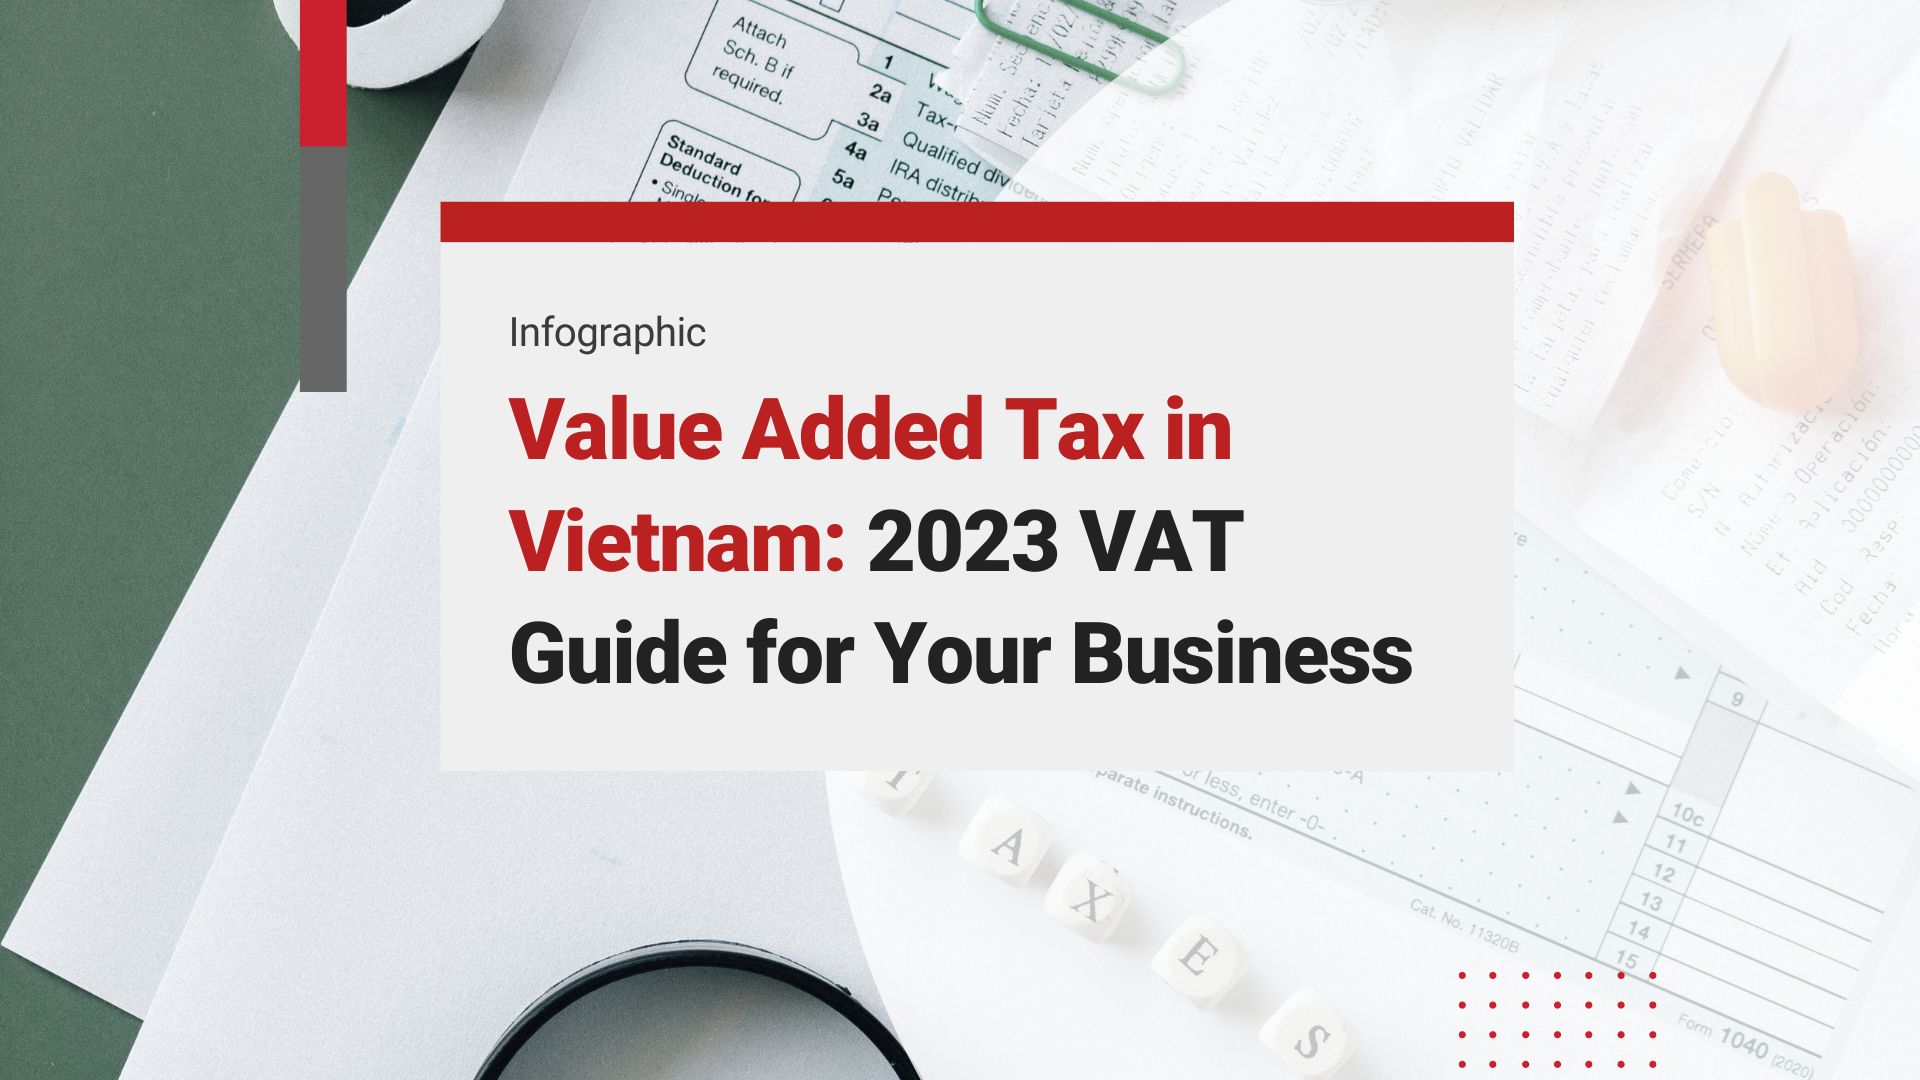 Guide to Value-Added Tax (VAT) in Vietnam for 2023